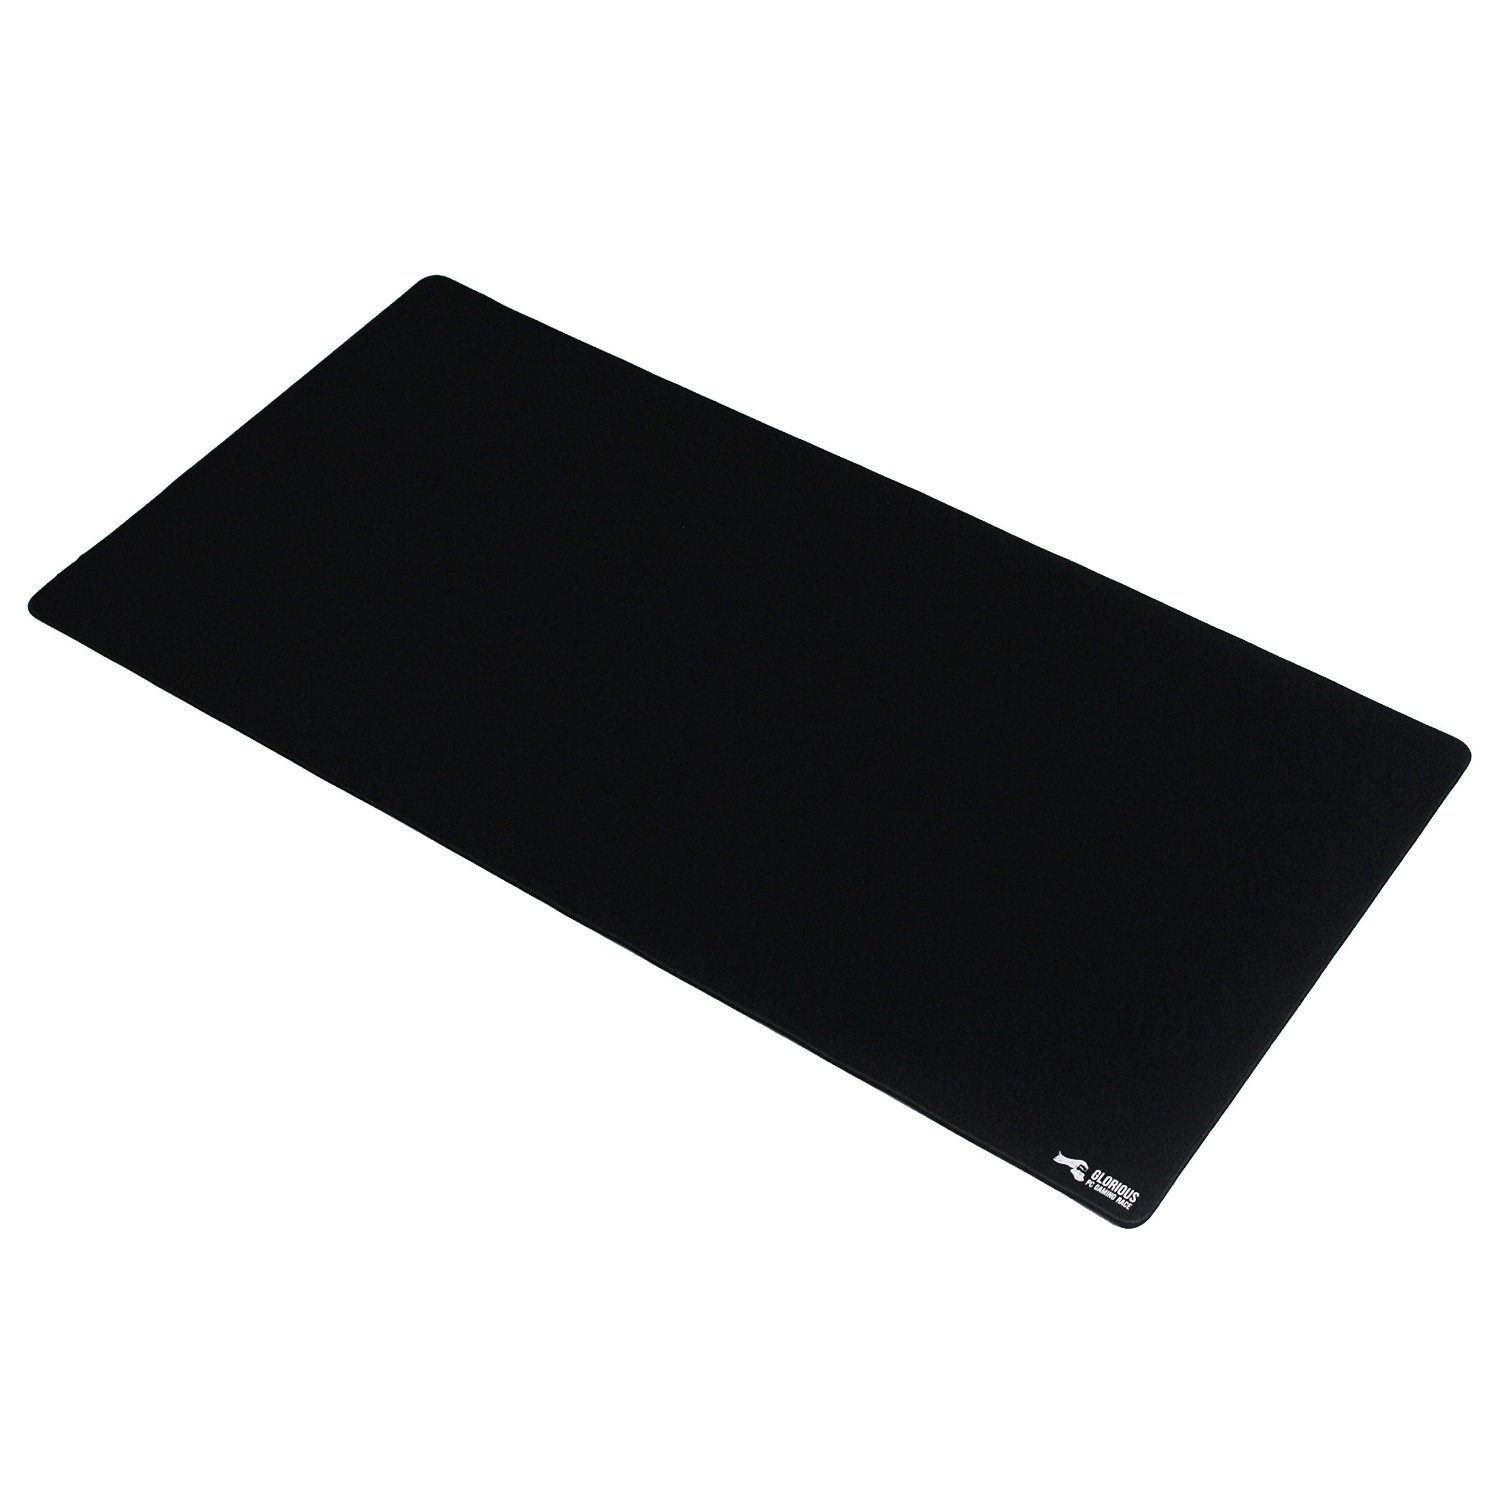 Glorious - Glorious G-XXL Tall Extended Full Desk Large Pro Gaming Surface - Black 914x457x3mm